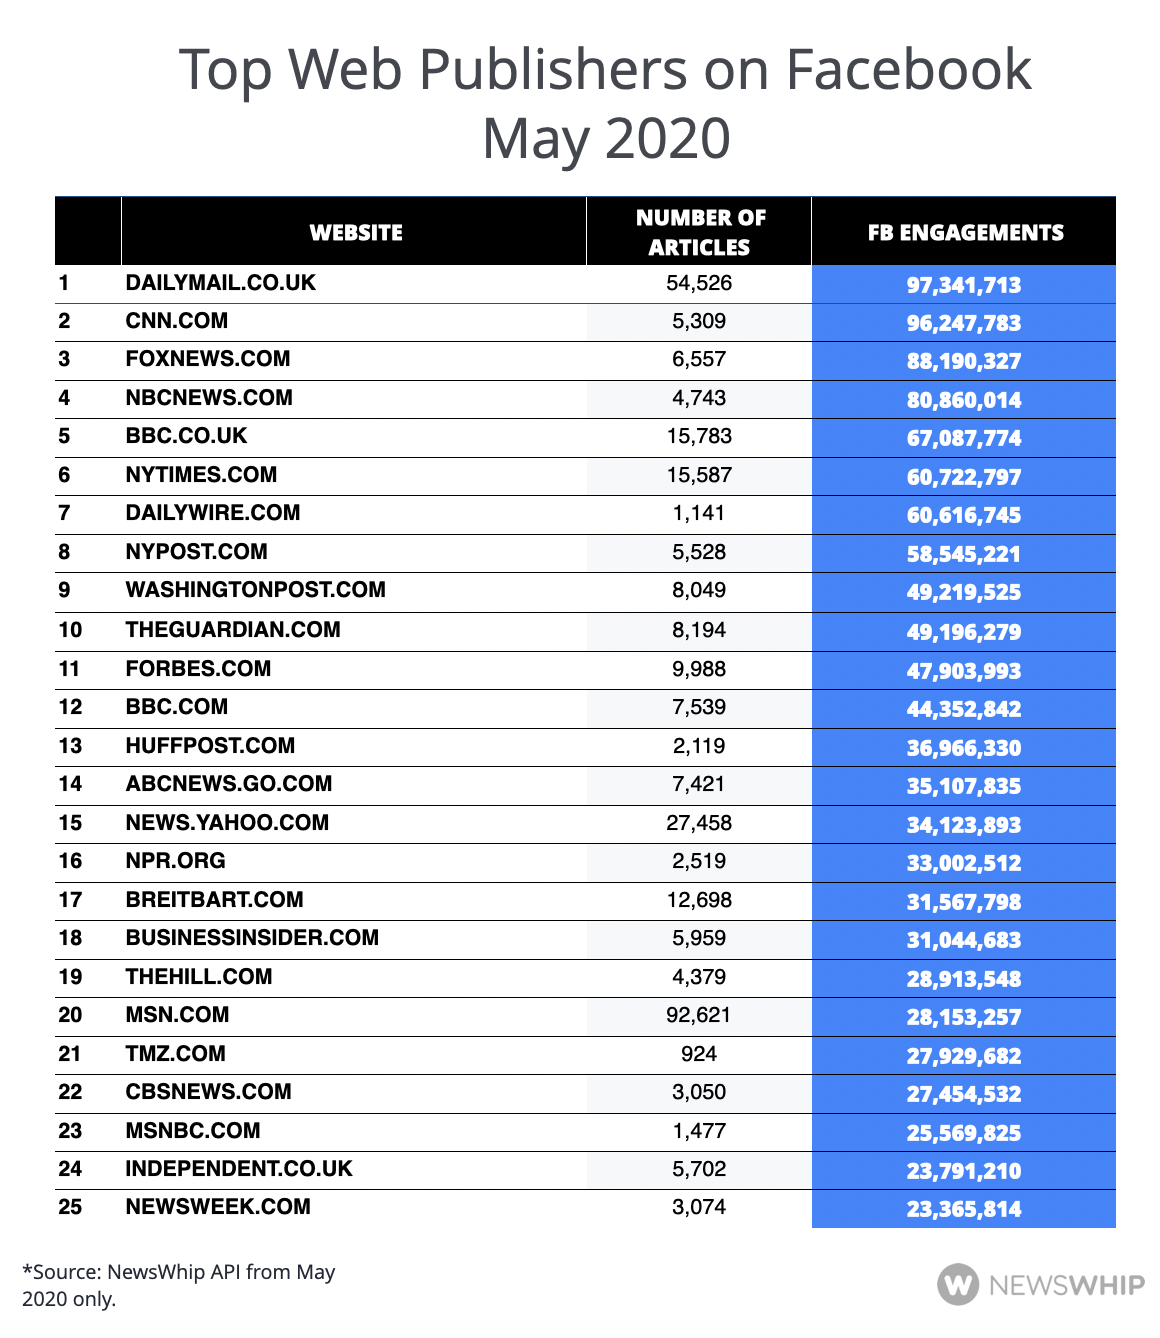 Chart showing the 25 most engaged publishers on Facebook in May 2020